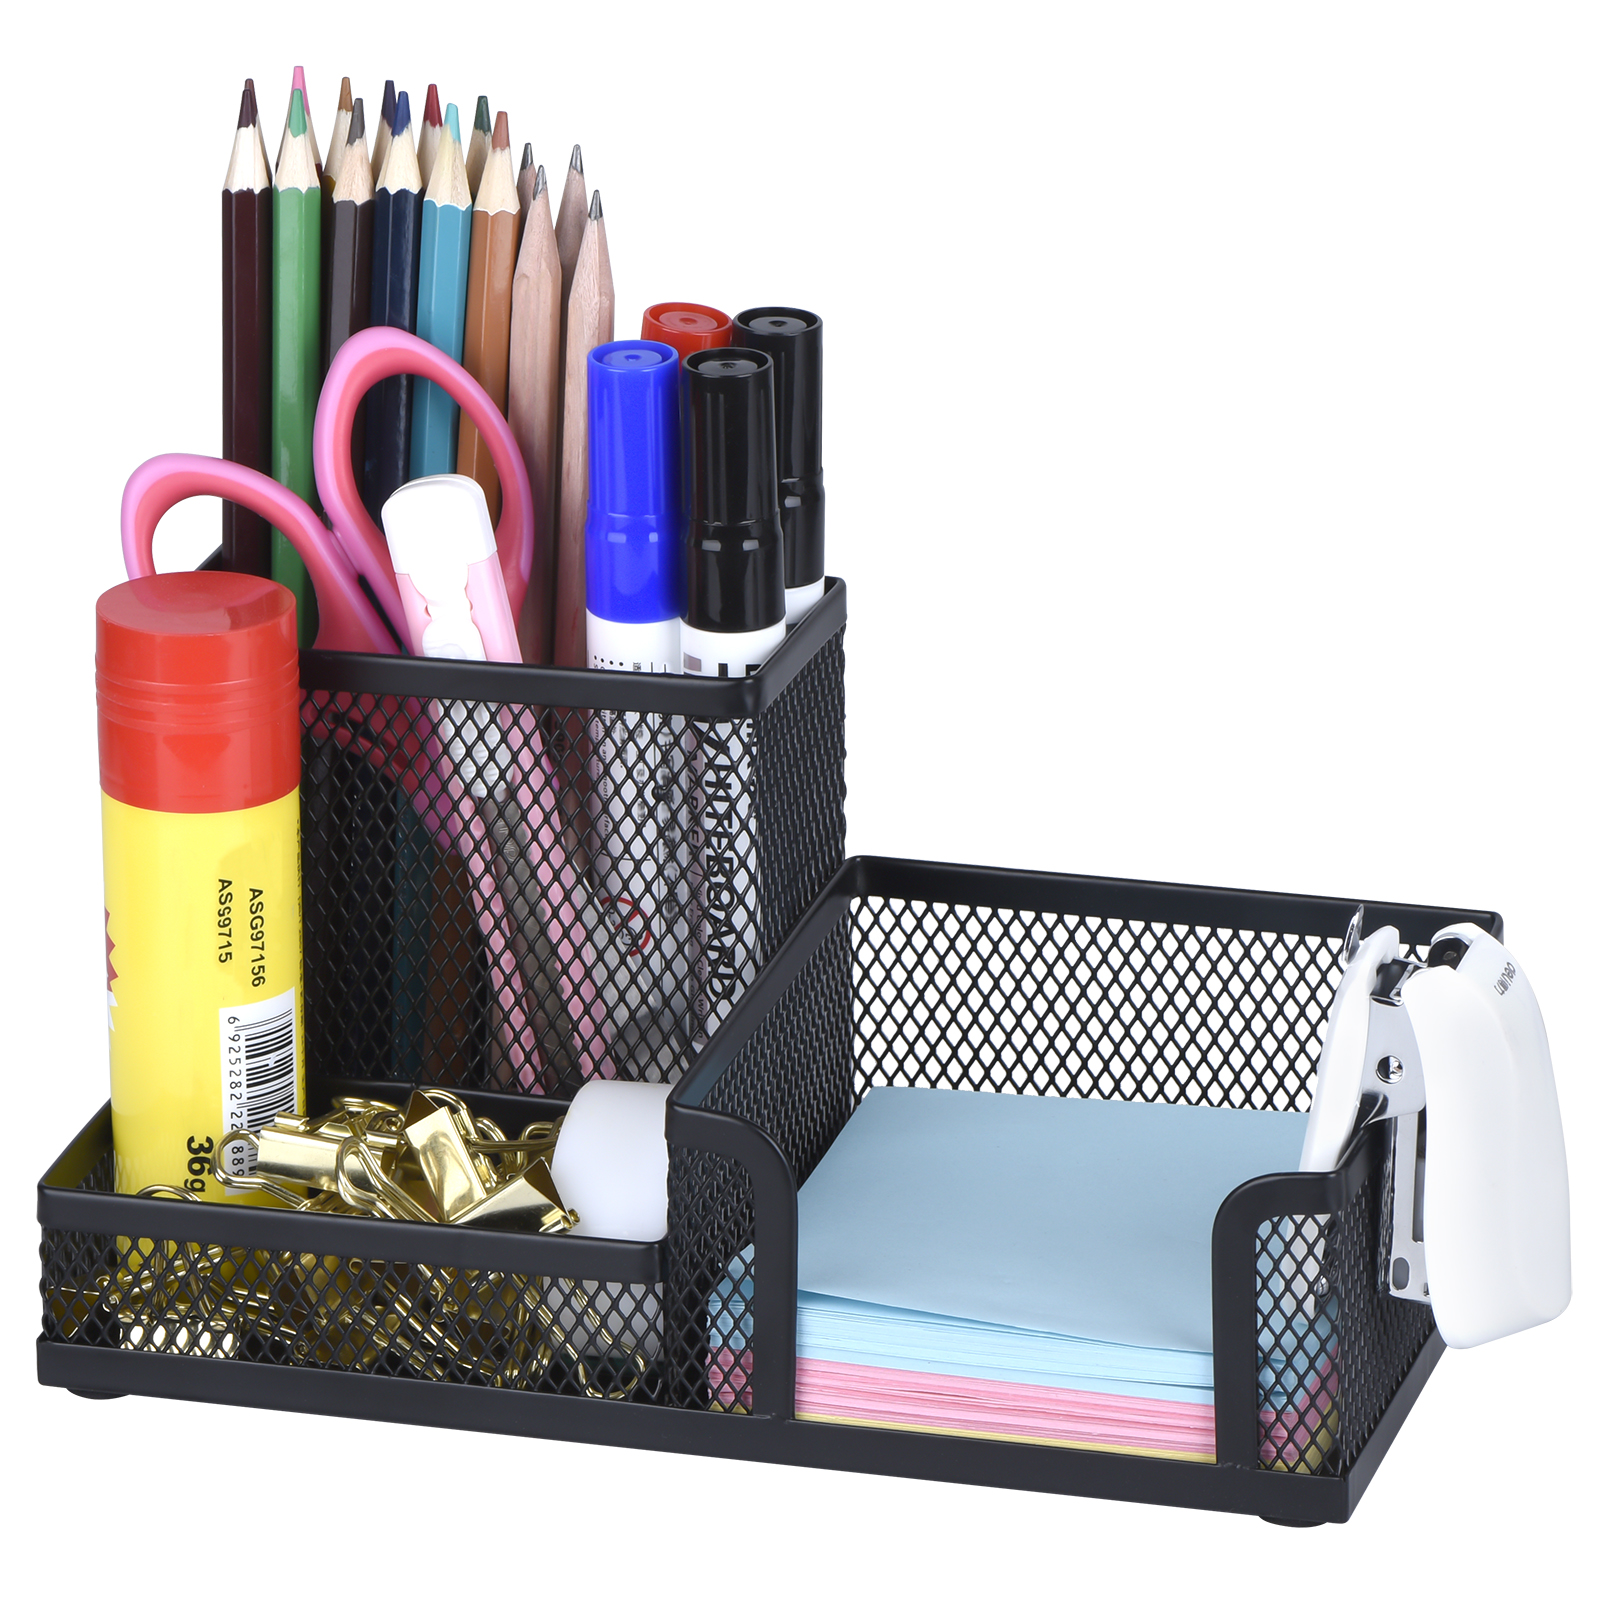 Comix Mesh Desk Organizer Office Supplies Caddy with Pencil Holder and Storage Baskets for Desktop Accessories, 3 Compartments, Black, B2061BK